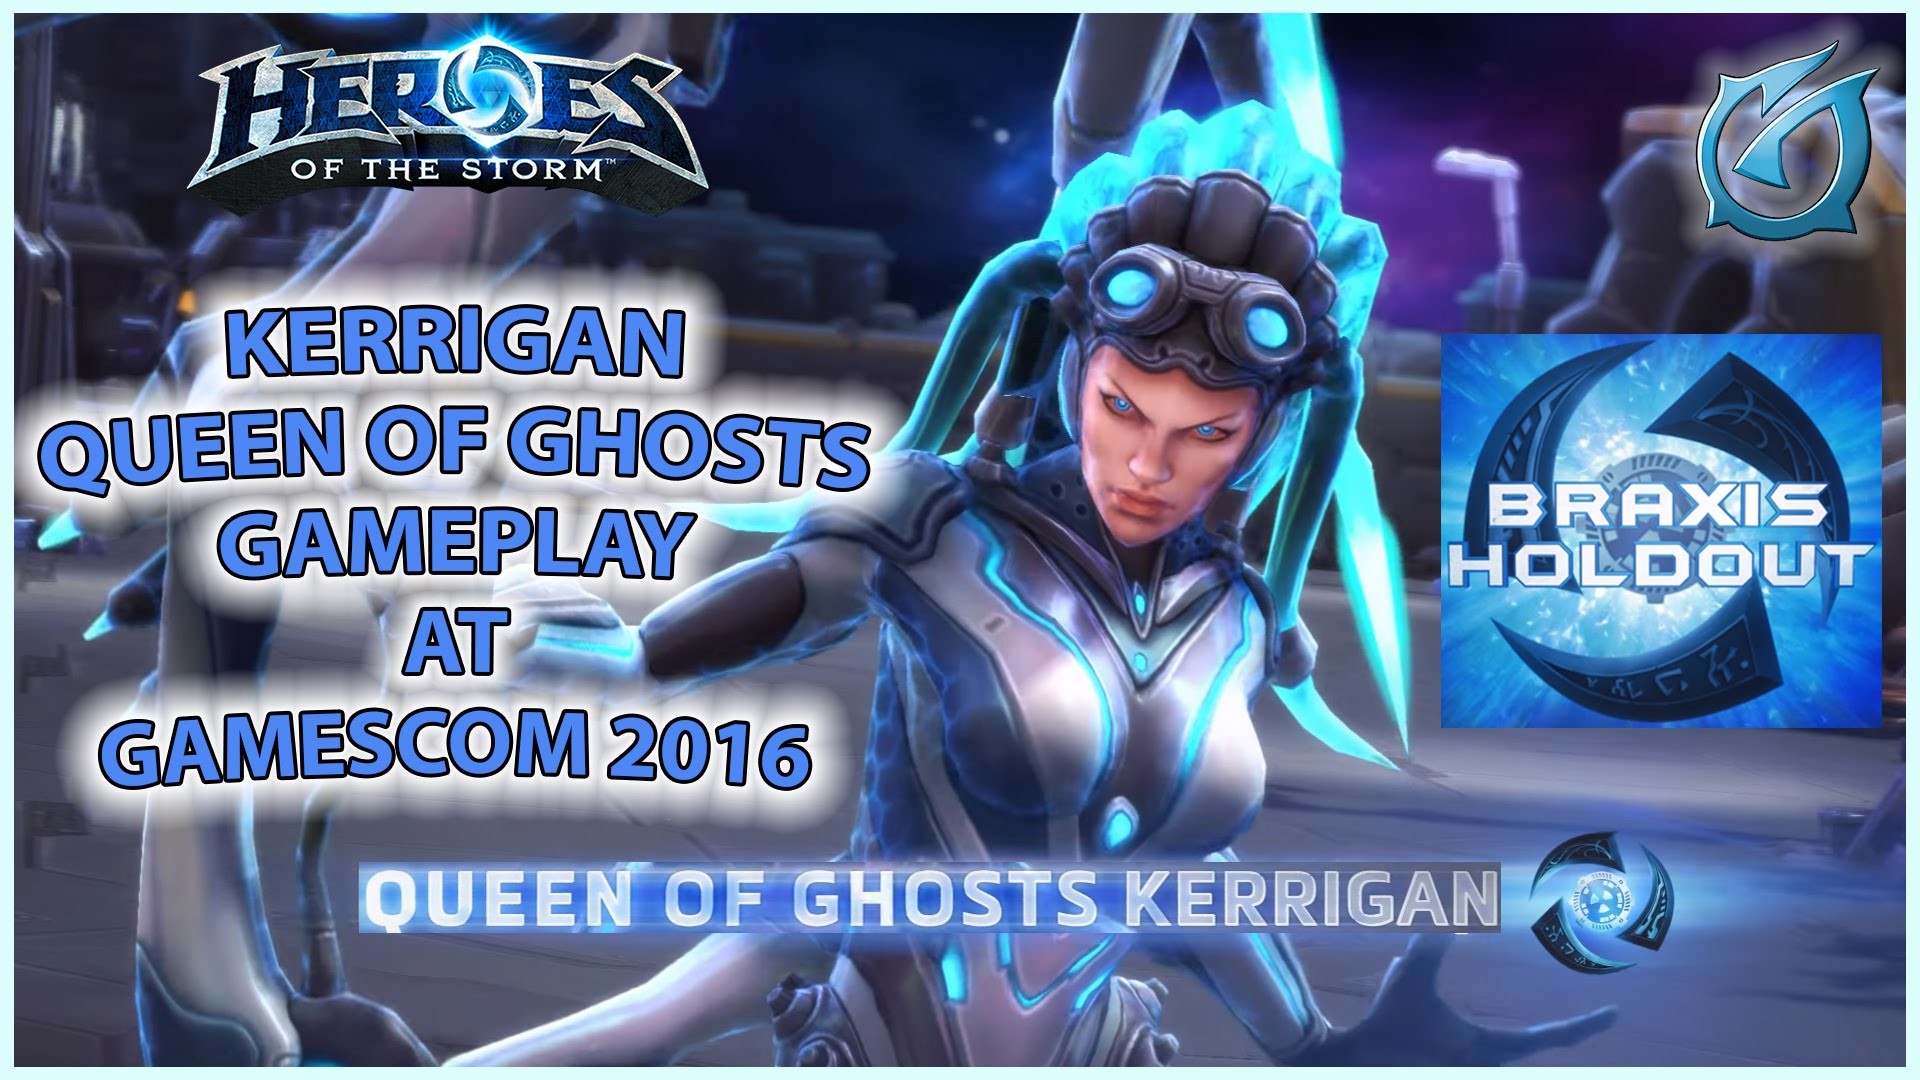 1920x1080 Grubby | Heroes of the Storm | Kerrigan - Queen of Ghosts - Braxis Holdout  at Gamescom 2016 - YouTube